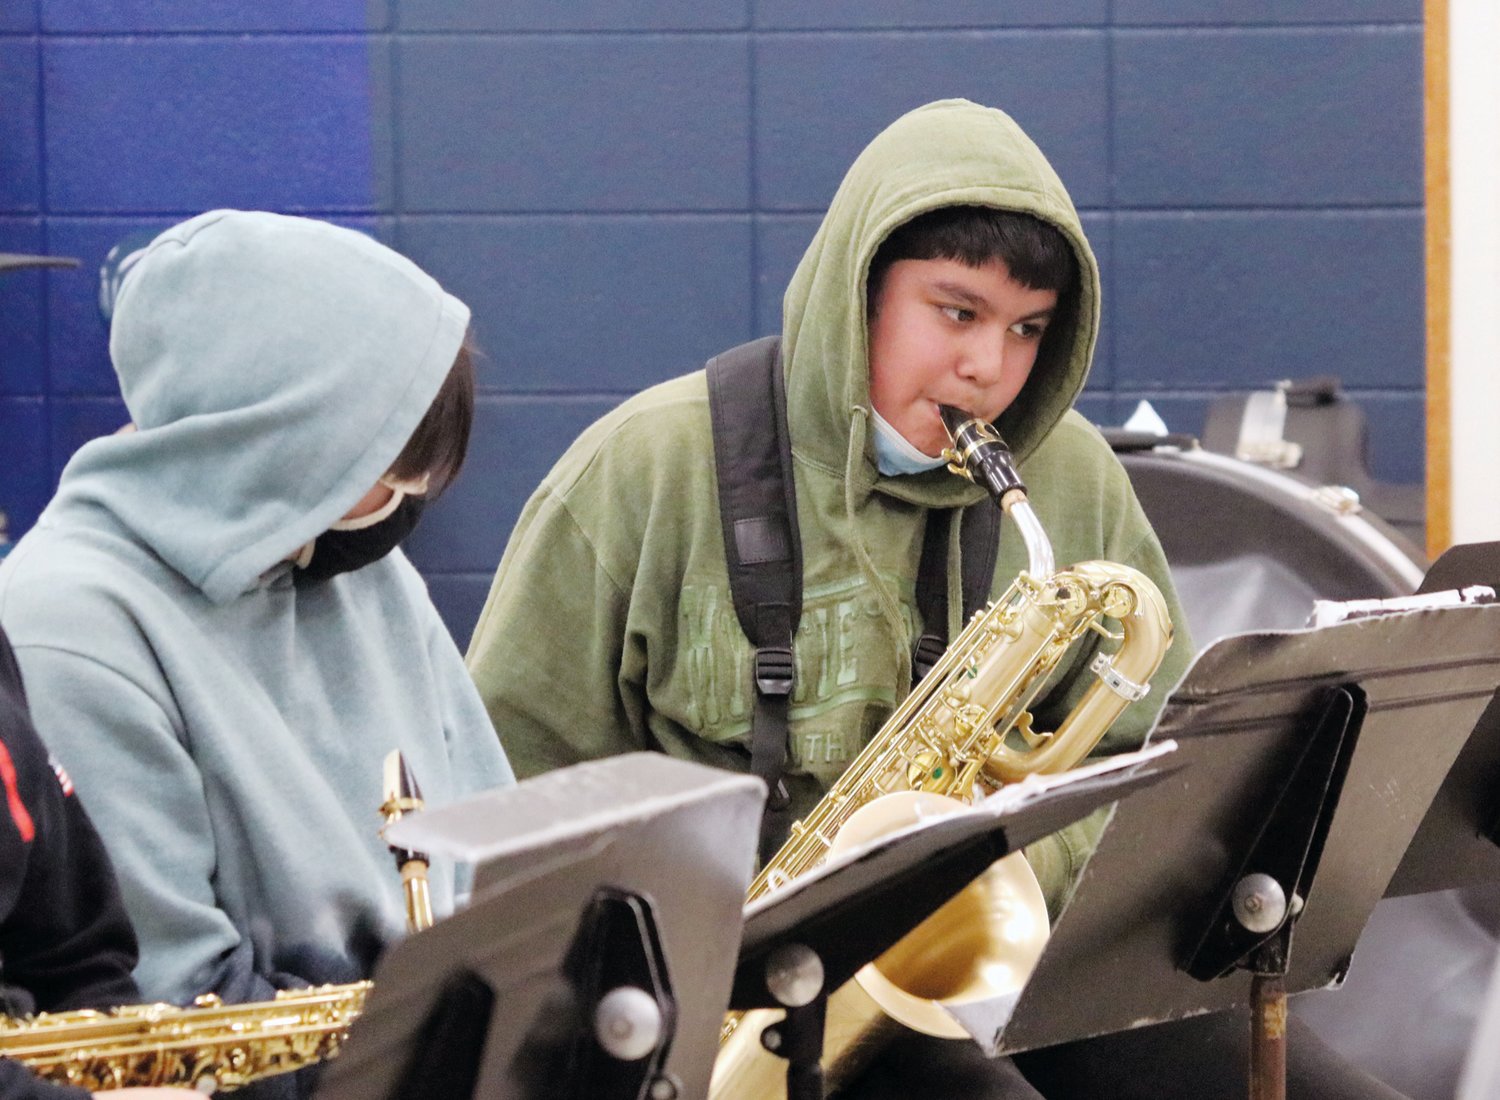 Saxophonist Jonathan Vasquez from Chatham Middle School plays a tune during an afternoon workshop led by La Fiesta Latin Jazz Sextet last Friday inside J-M.